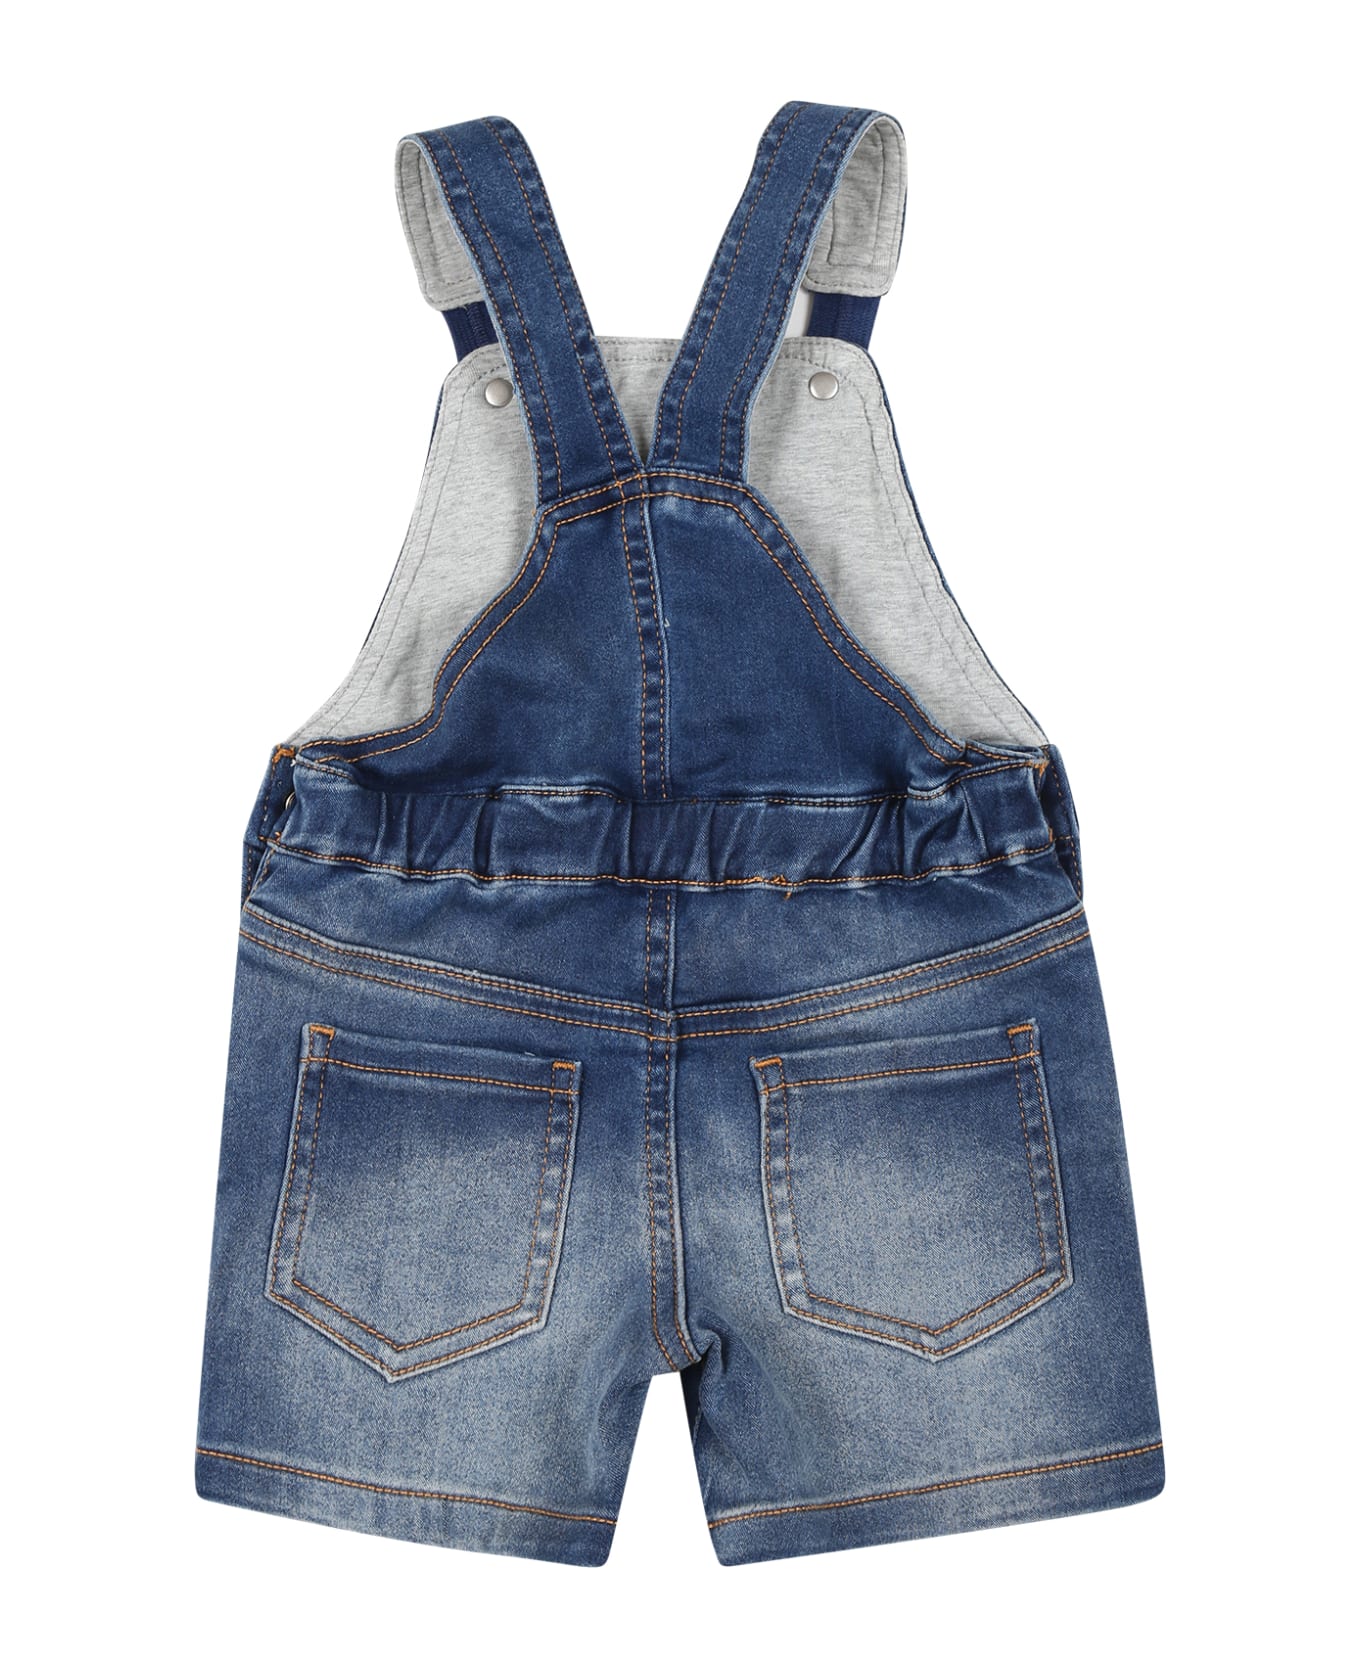 Moschino Blue Dungarees For Babykids With Teddy Bear And Logo - Denim コート＆ジャケット